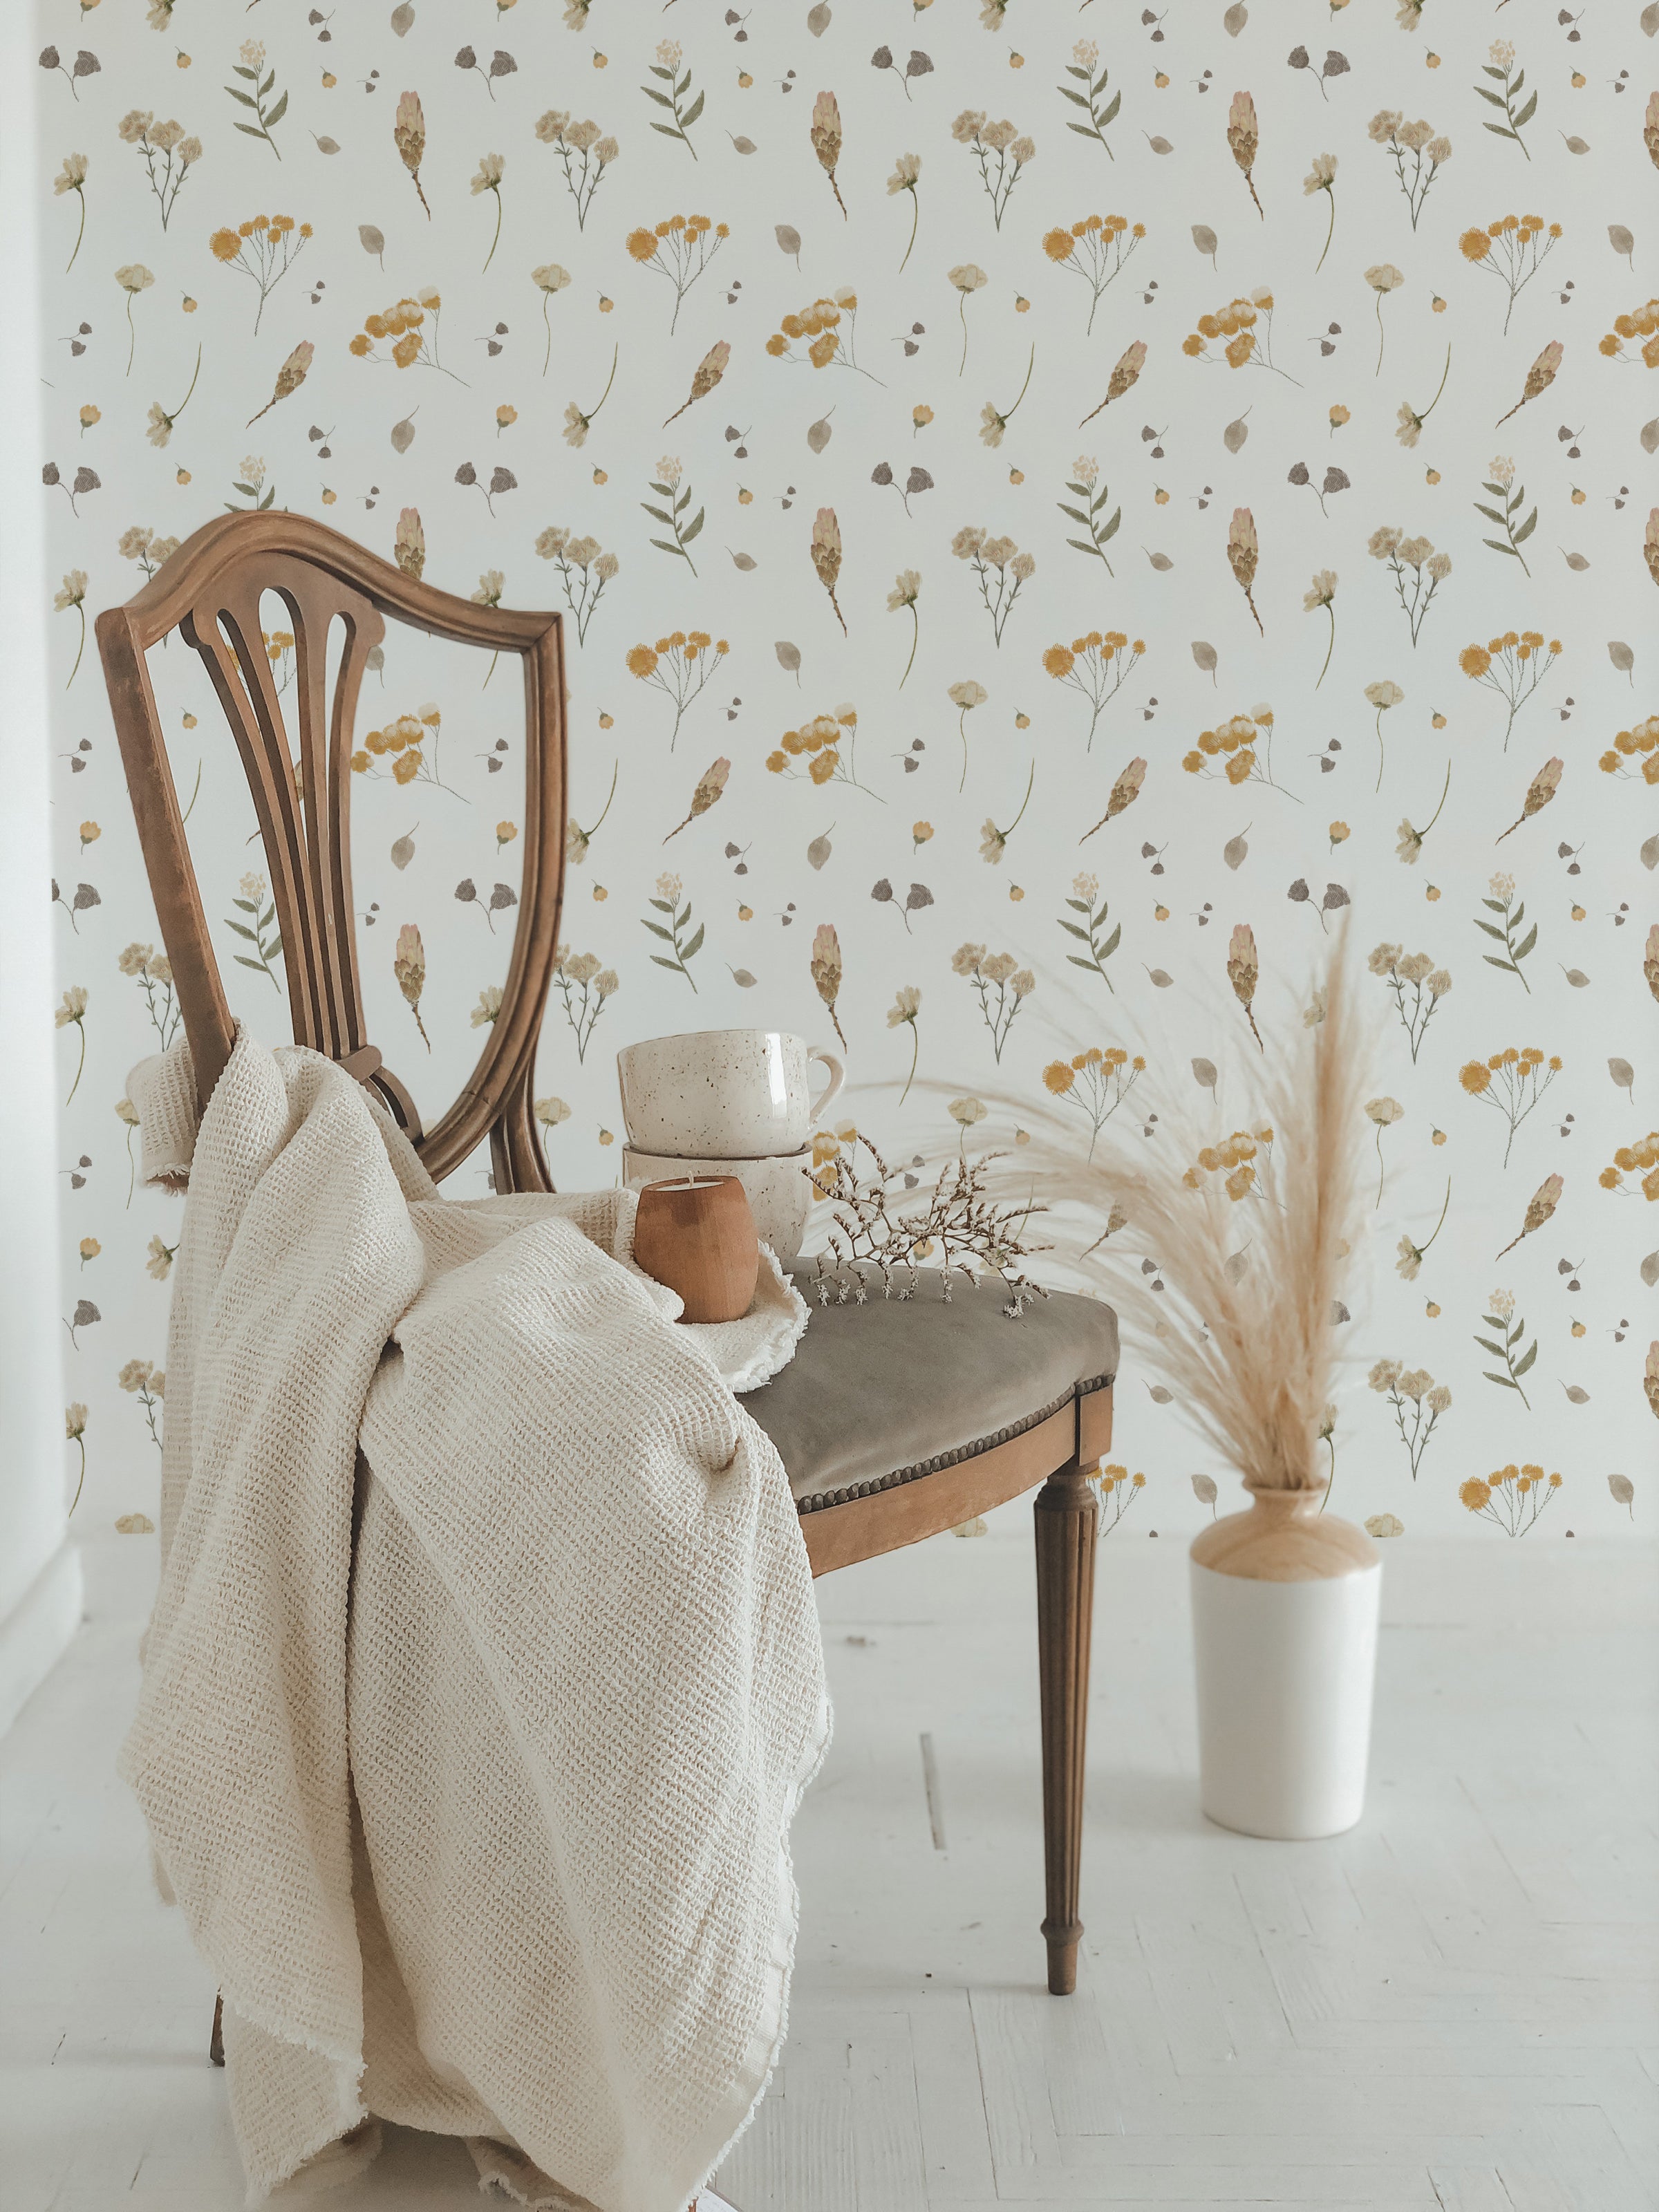 An elegant vintage chair draped with a cozy cream knit blanket sits in front of a wall covered in Buttercup Fields Wallpaper, showcasing a whimsical pattern of yellow buttercup flowers and soft gray foliage on a white background.